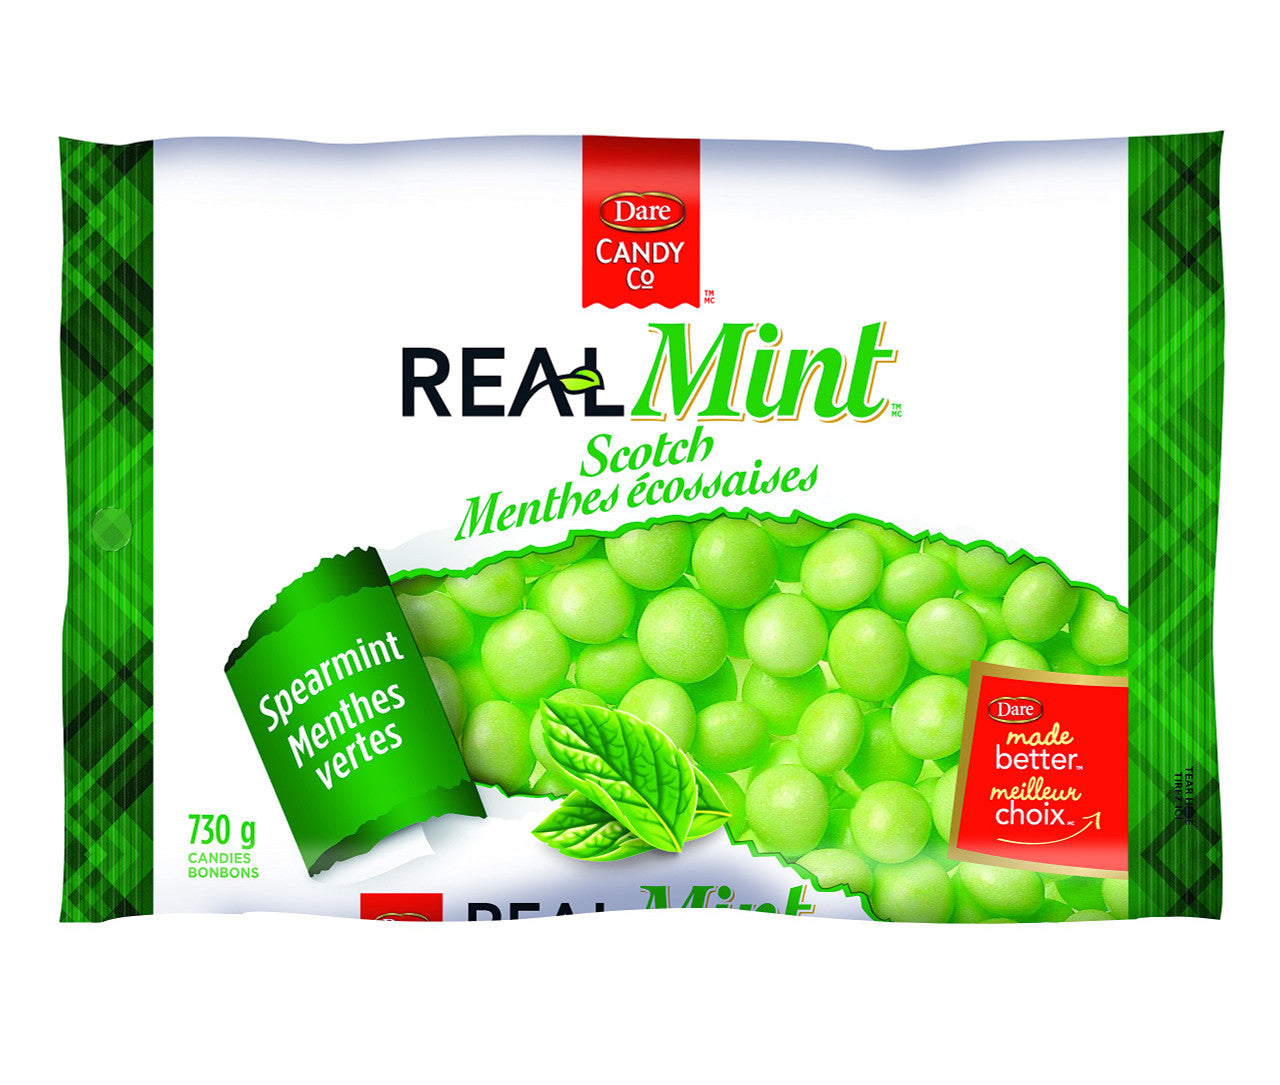 Dare Real Mint Scotch Mints Spearmint, 730g/1.6lbs, 12 Count, {Imported from Canada}